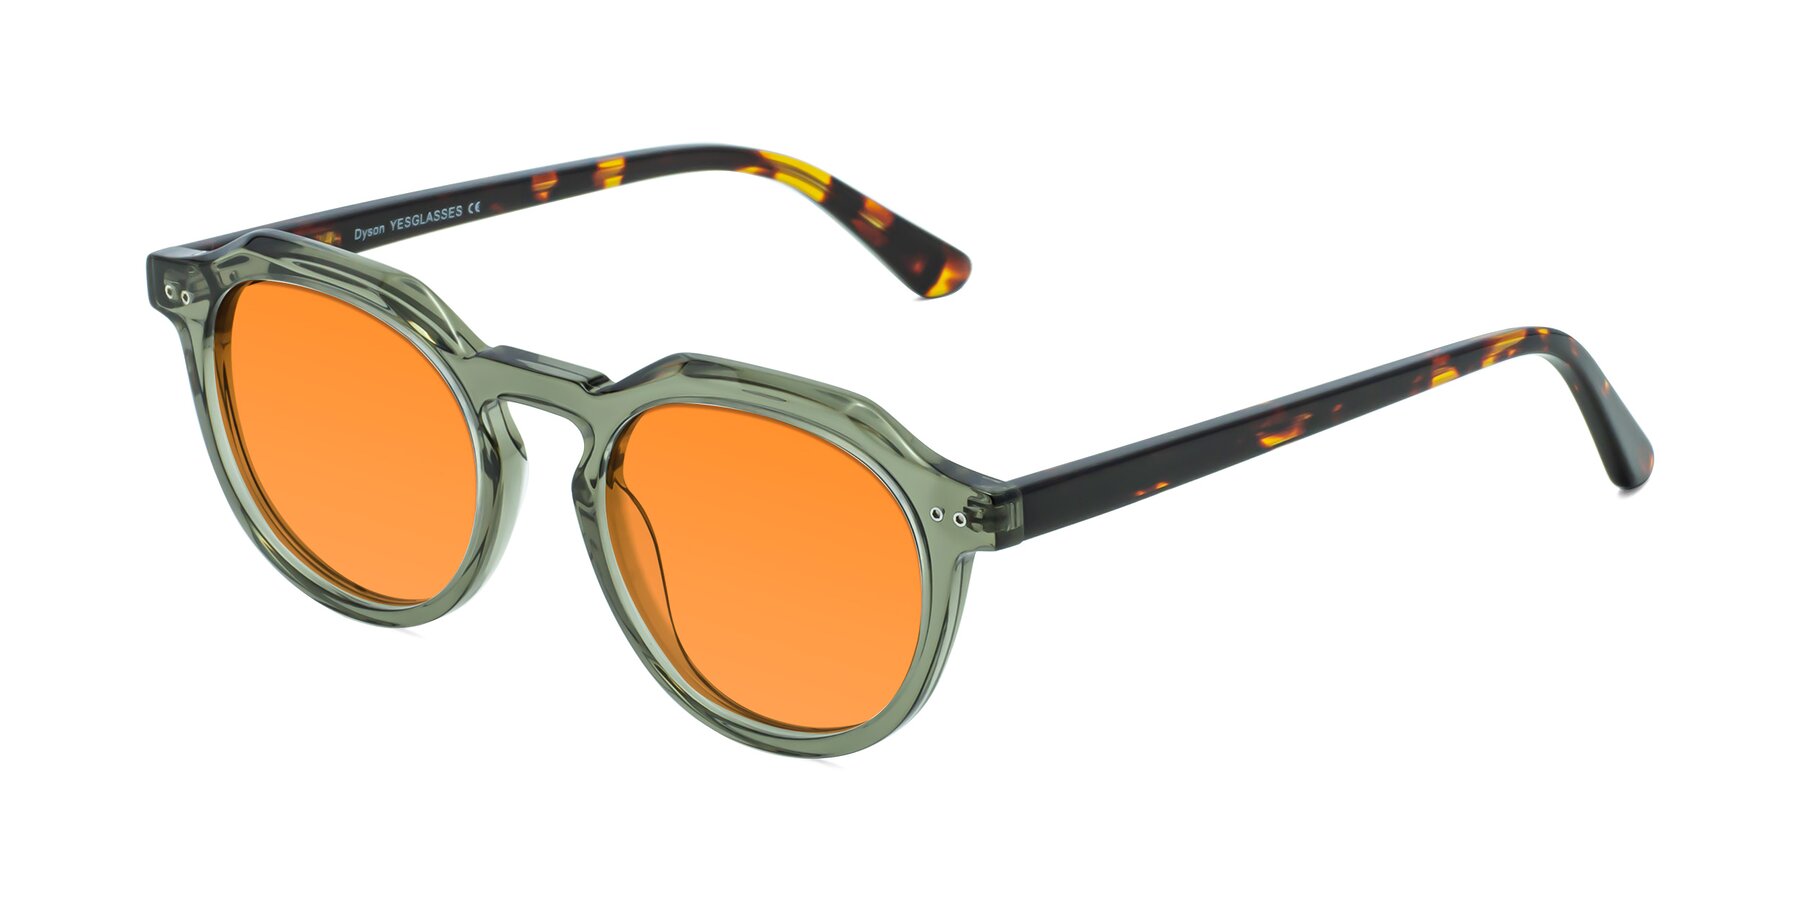 Angle of Dyson in Transparent Green-Tortoise with Orange Tinted Lenses